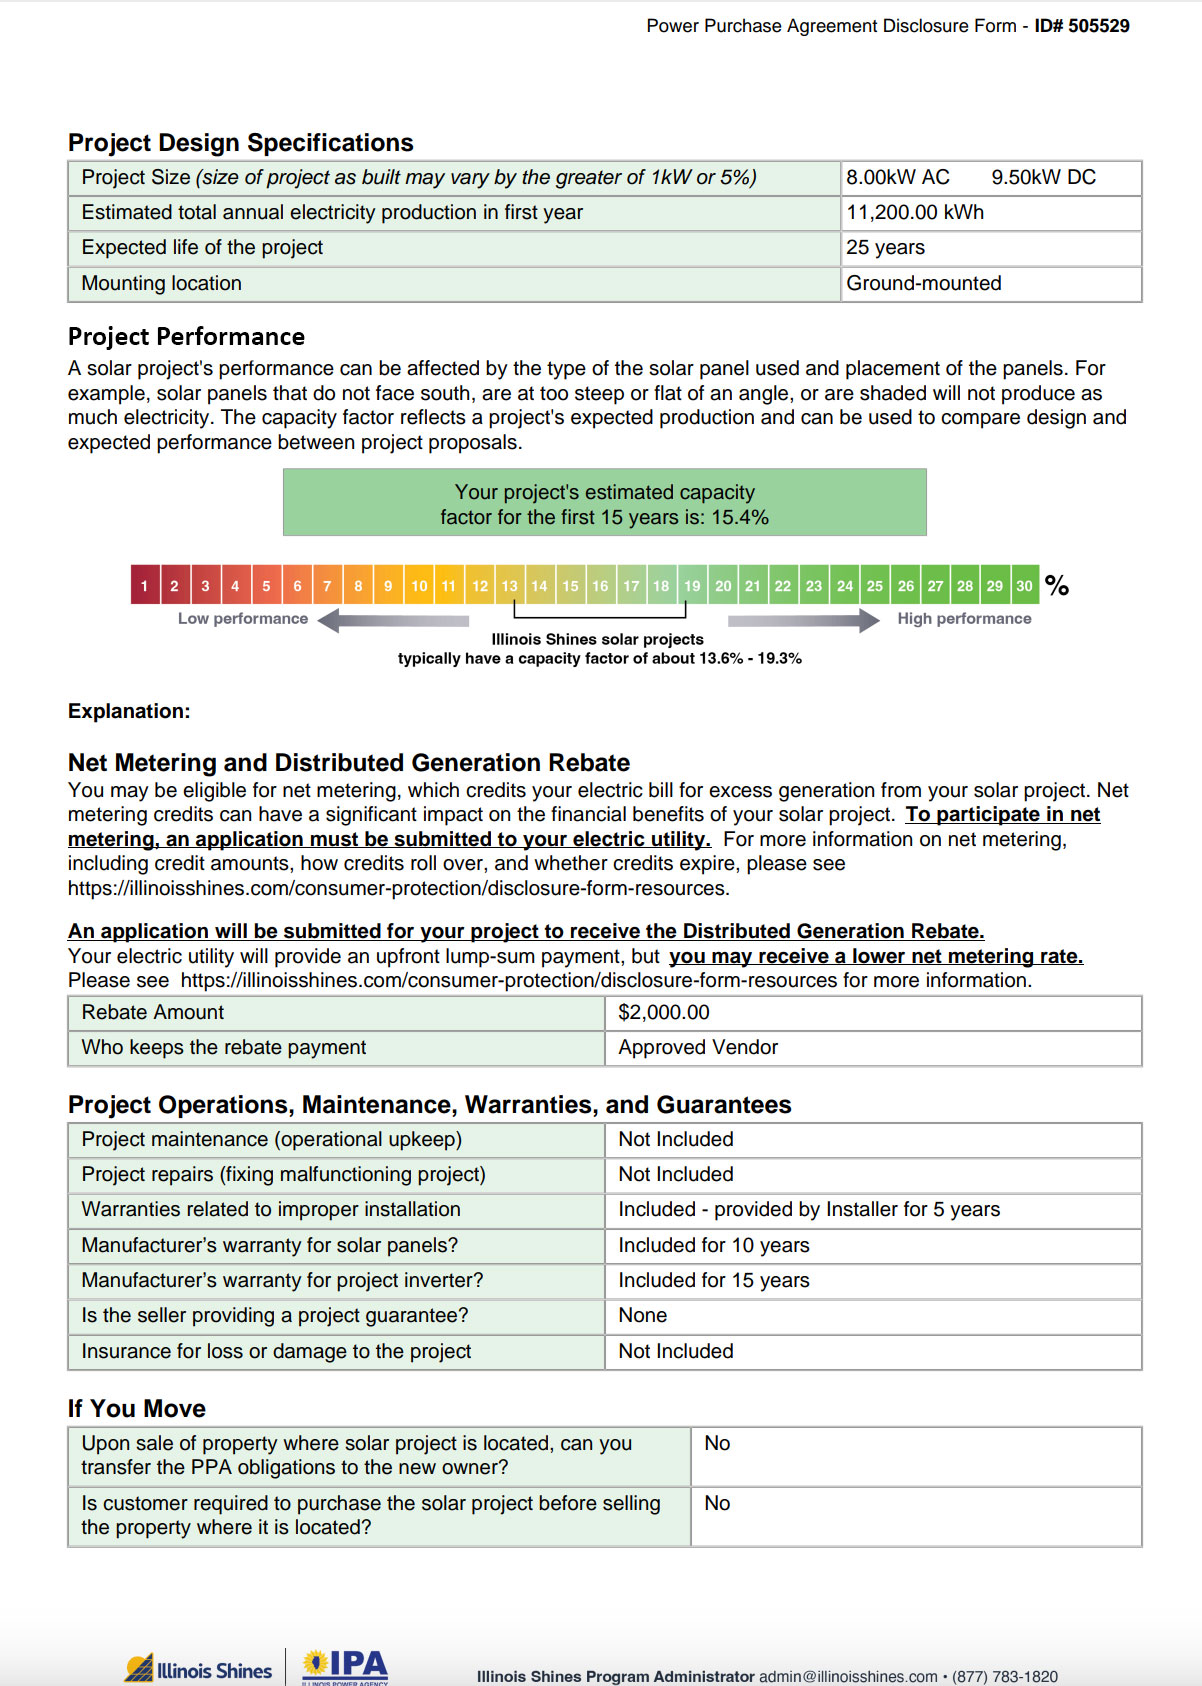 Distributed Generation Disclosure Form page